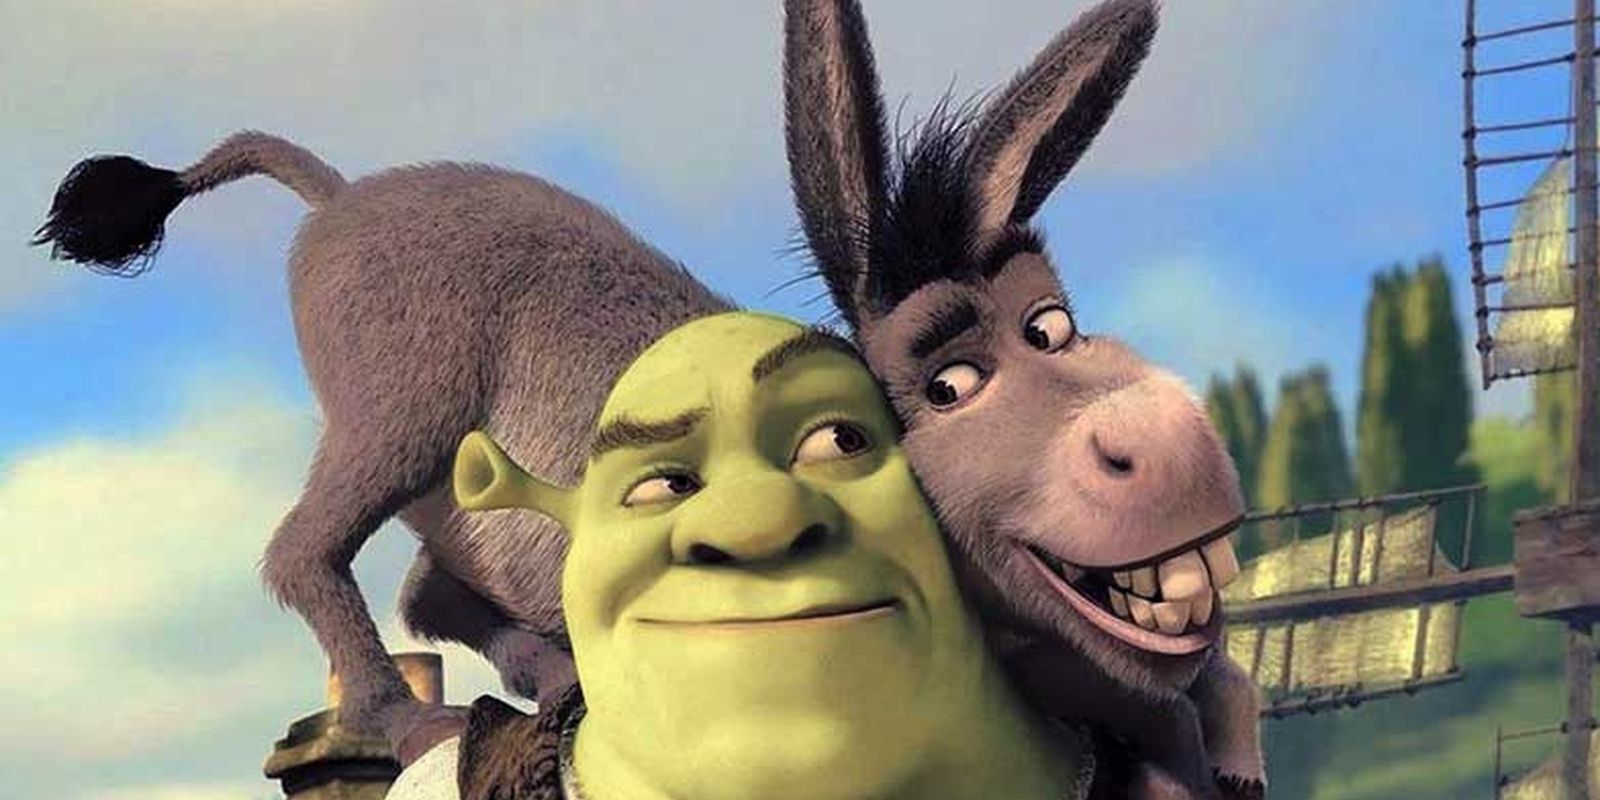 Shrek and Donkey leaning their faces together  in DreamWorks' Shrek